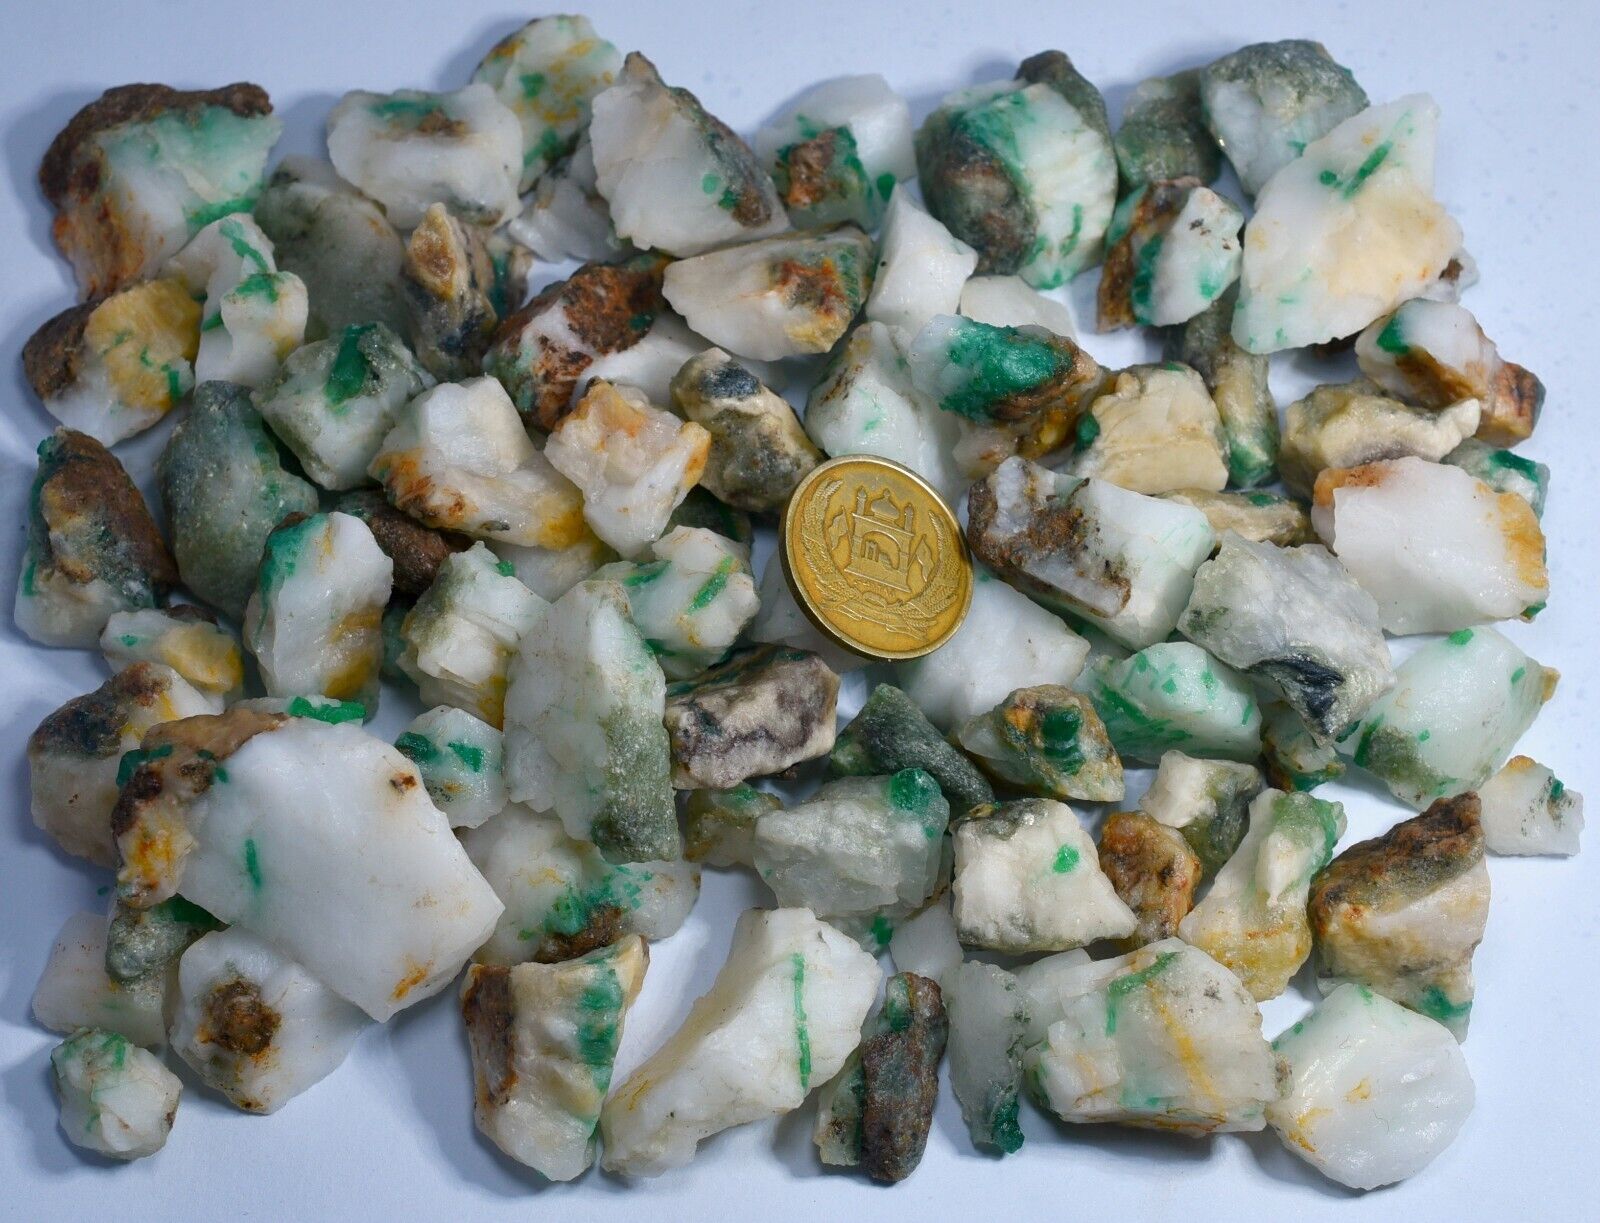 500 GM Mesmerising Natural Green Emerald Crystals Specimens Lot From Pakistan